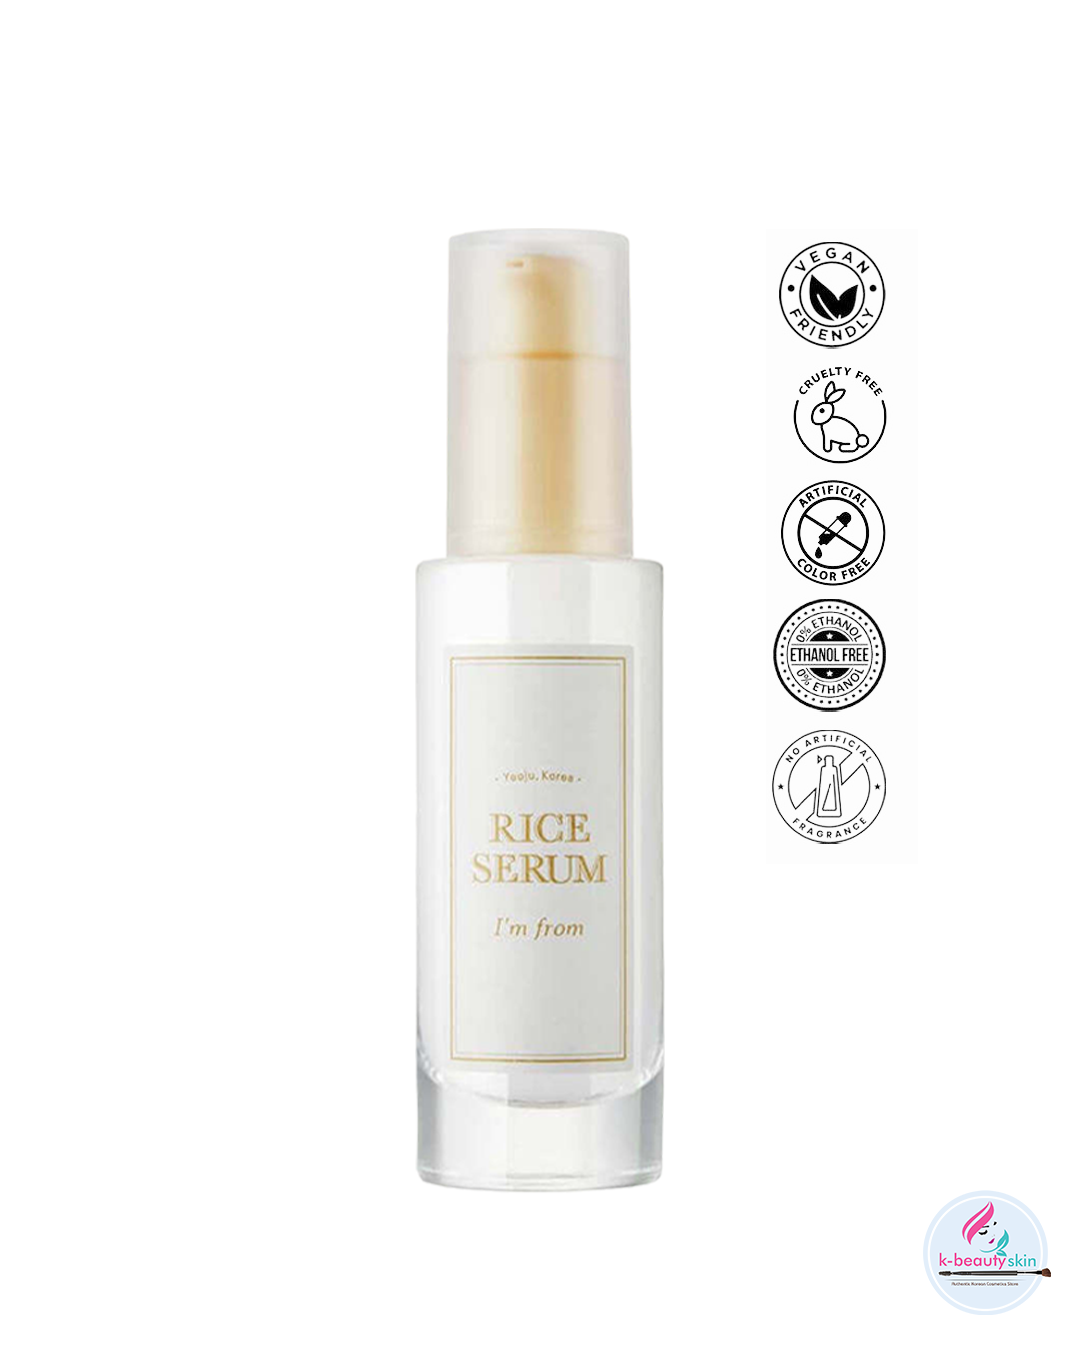 Embrace Youthful Radiance with Ginseng Serum 30ml - Your K-Beauty Essential